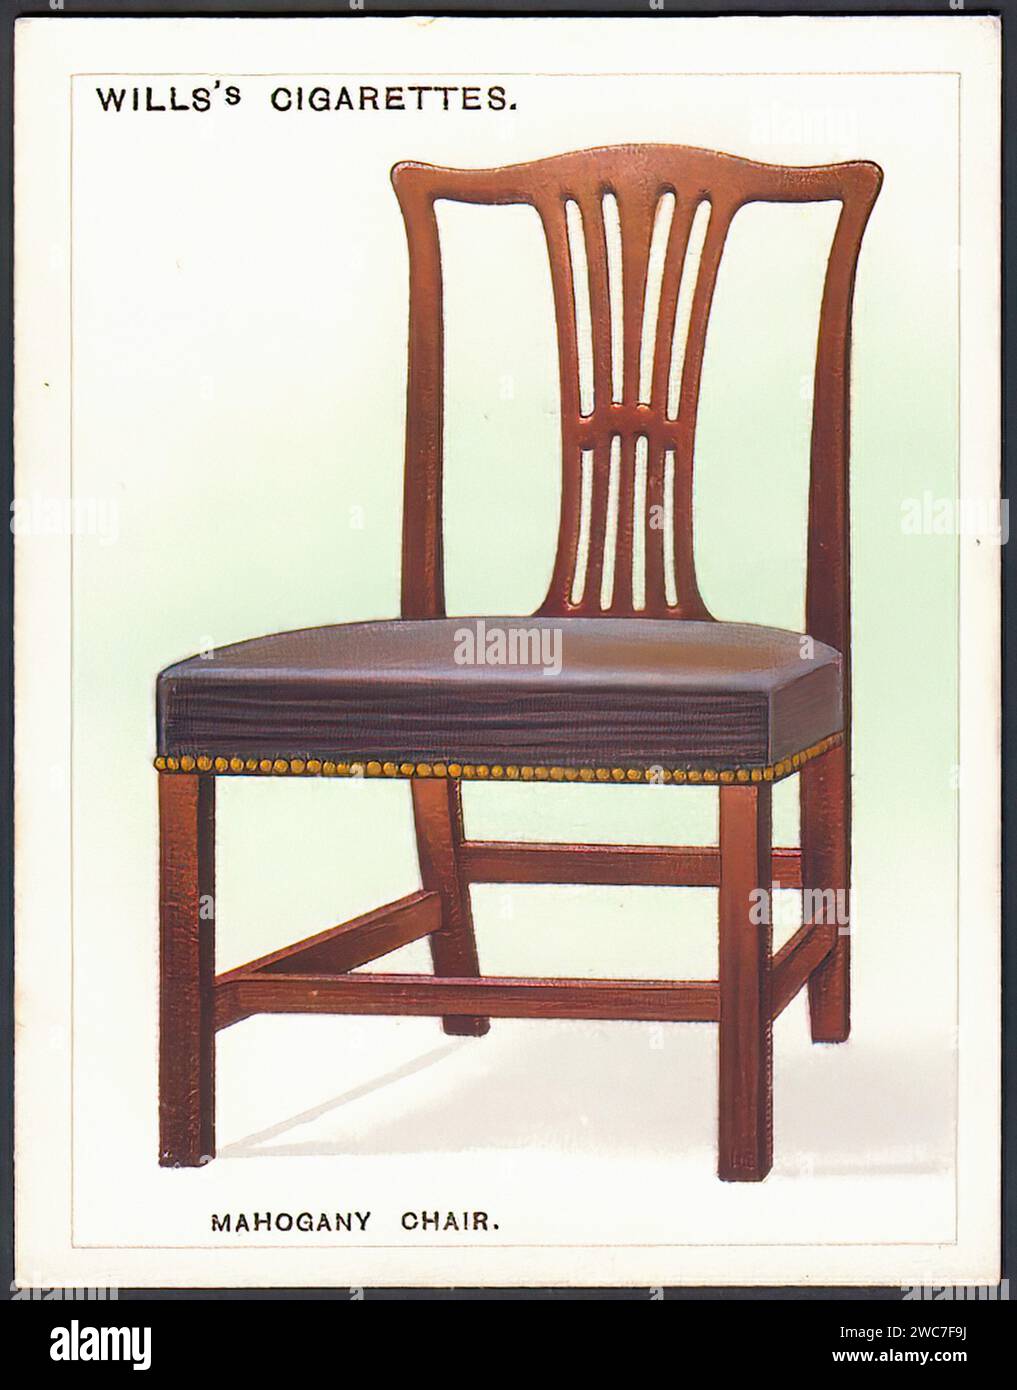 Chippendale Mahogany Chair - Vintage Cigarette Card Illustration Stock Photo